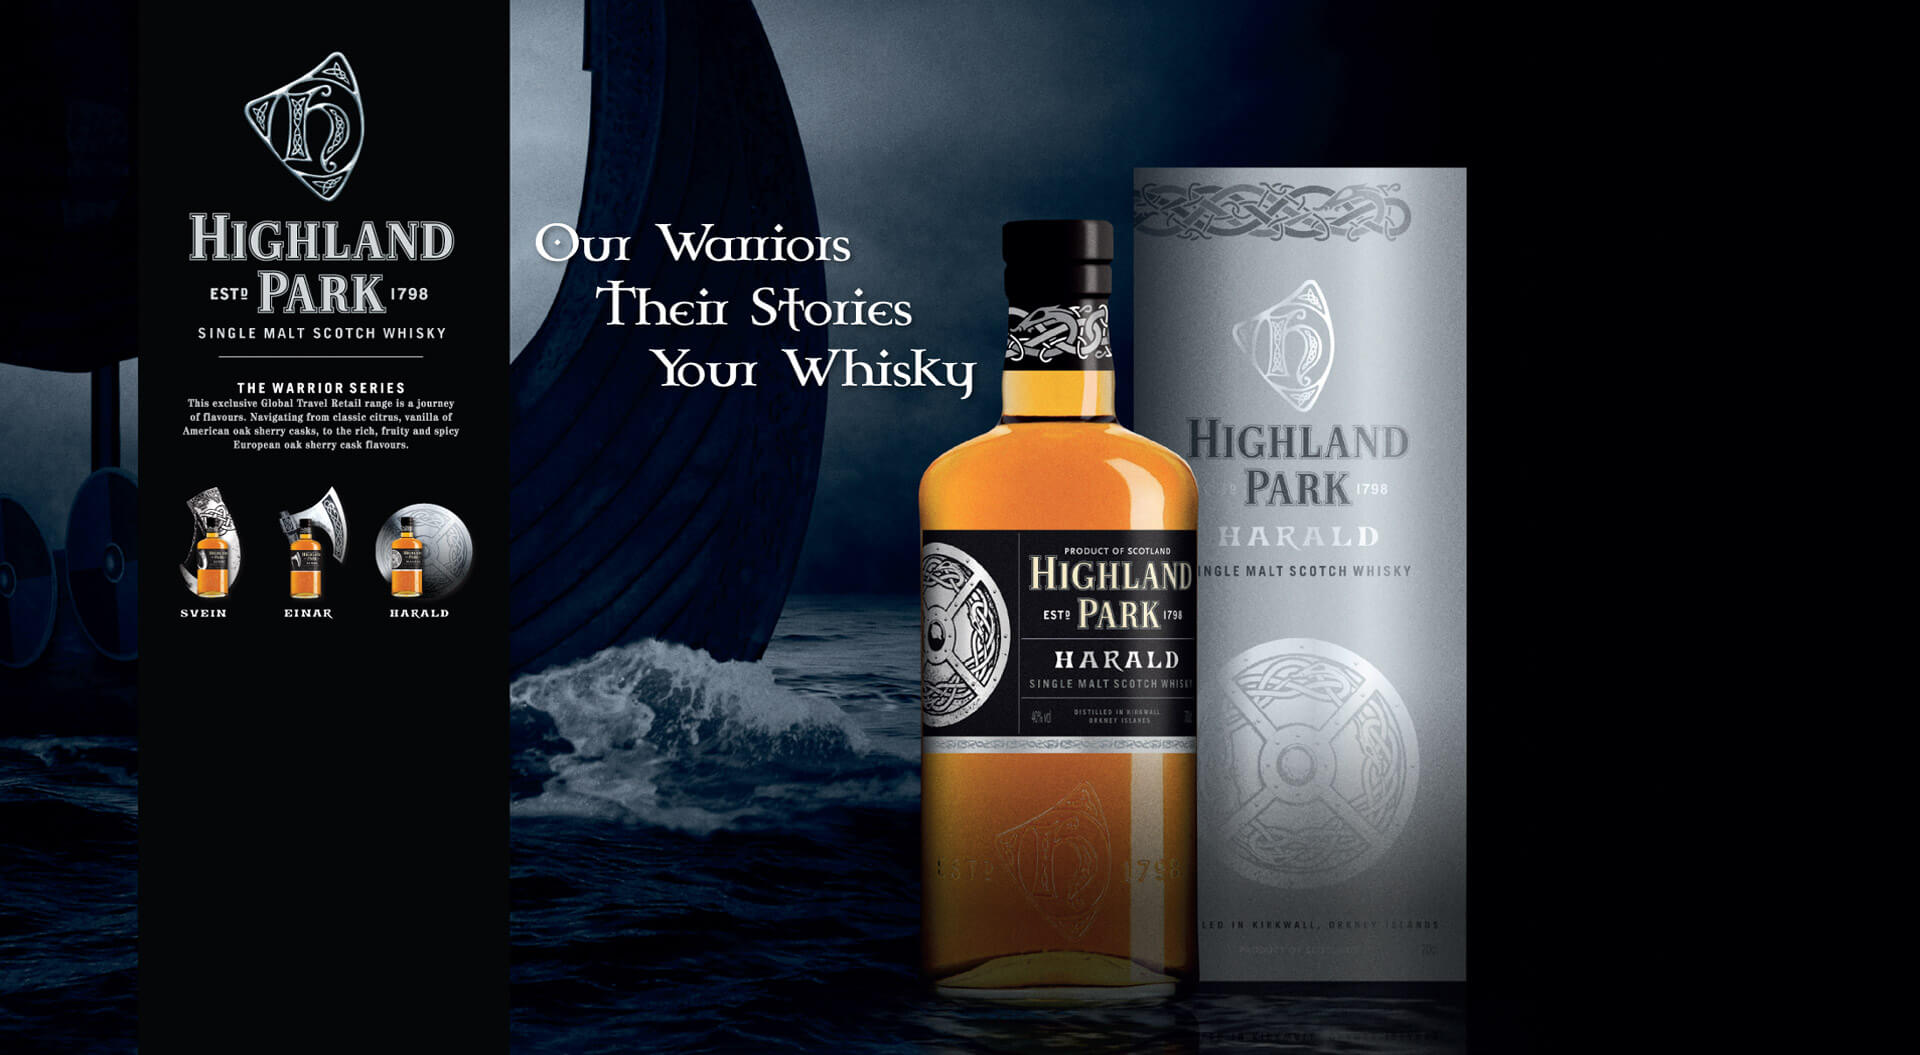 Highland Park Single Malt Scotch Whisky packaging design for Harald and brand marketing for airports duty free